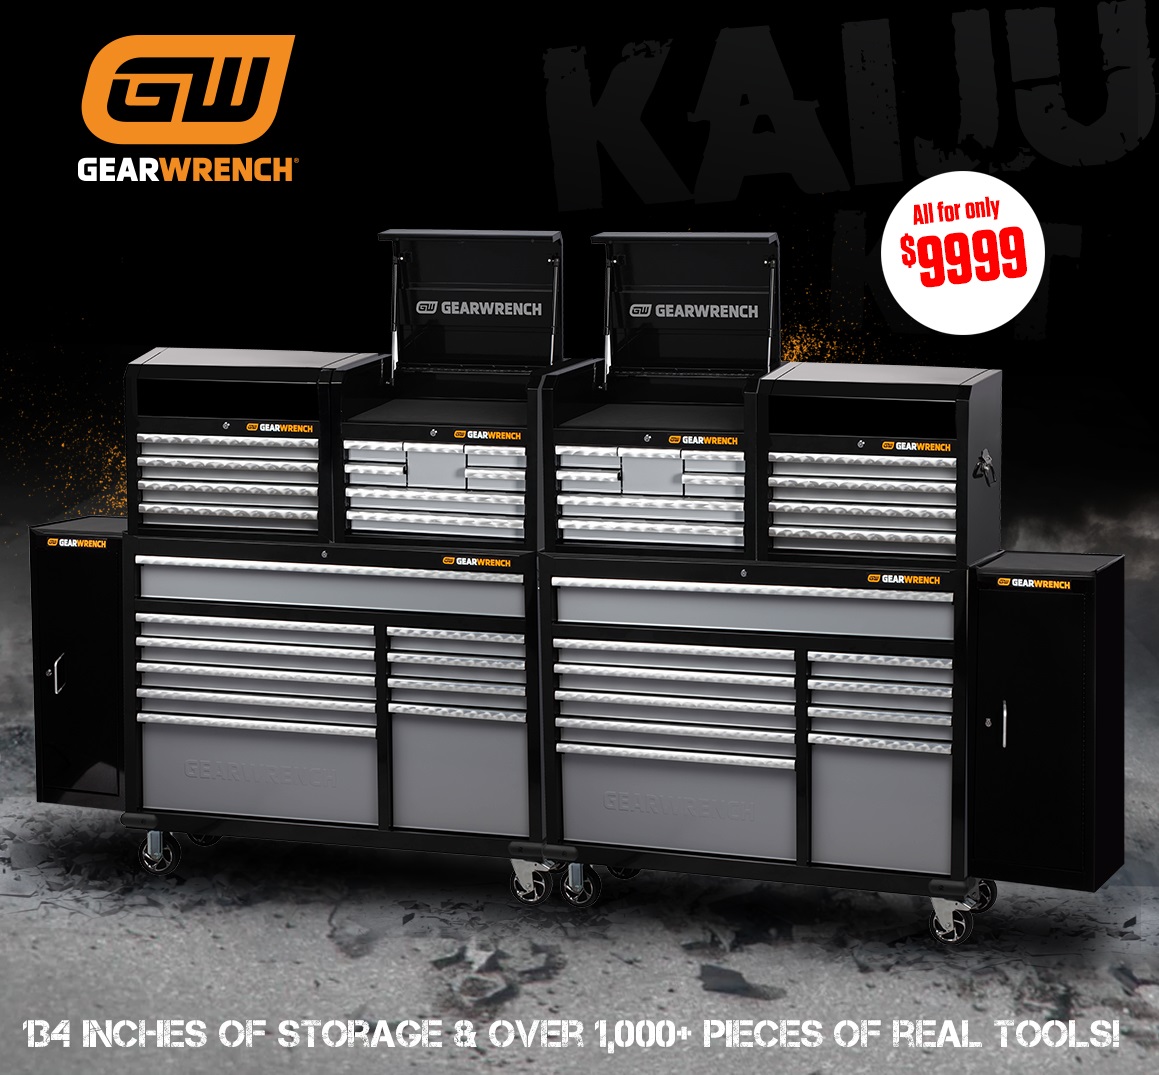 GEARWRENCH 66666 1000 Piece Kaiju Monster Tool Kit – 2x 53” Trolleys, 4x  Chests  2x Side Cabinets Combo Chests  Trolleys, GEARWRENCH Catalogue,  New Products, Sale Items, Sockets  Sets,